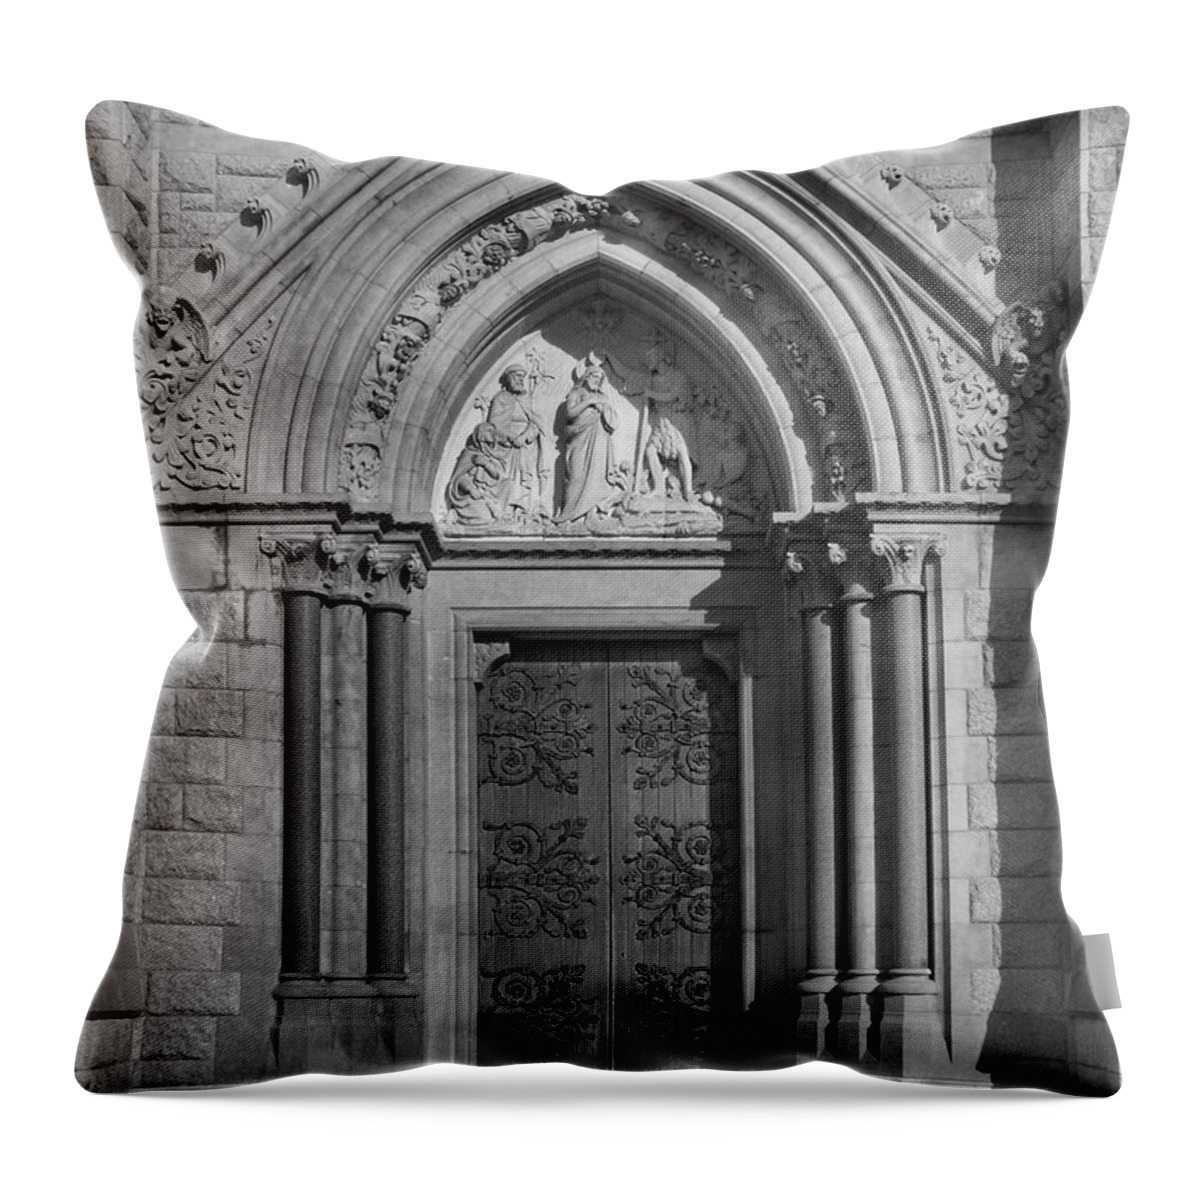 Ireland Throw Pillow featuring the photograph The Cathedral Door by Mike McGlothlen